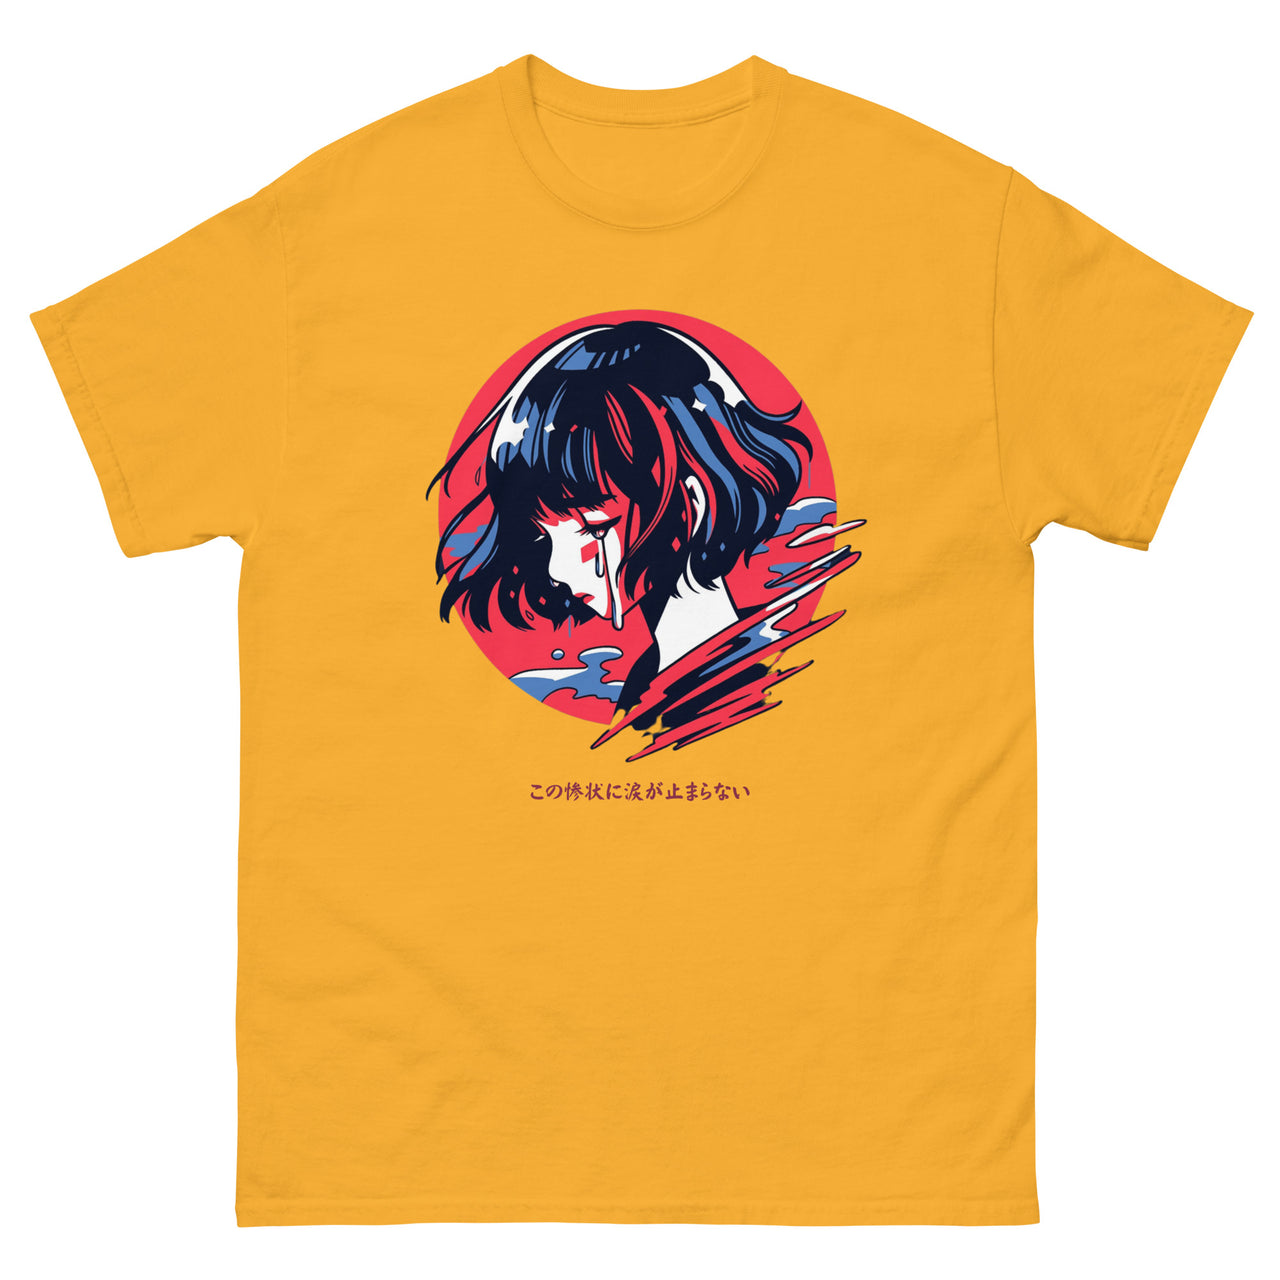 Anime Girl in Tragedy T-Shirt